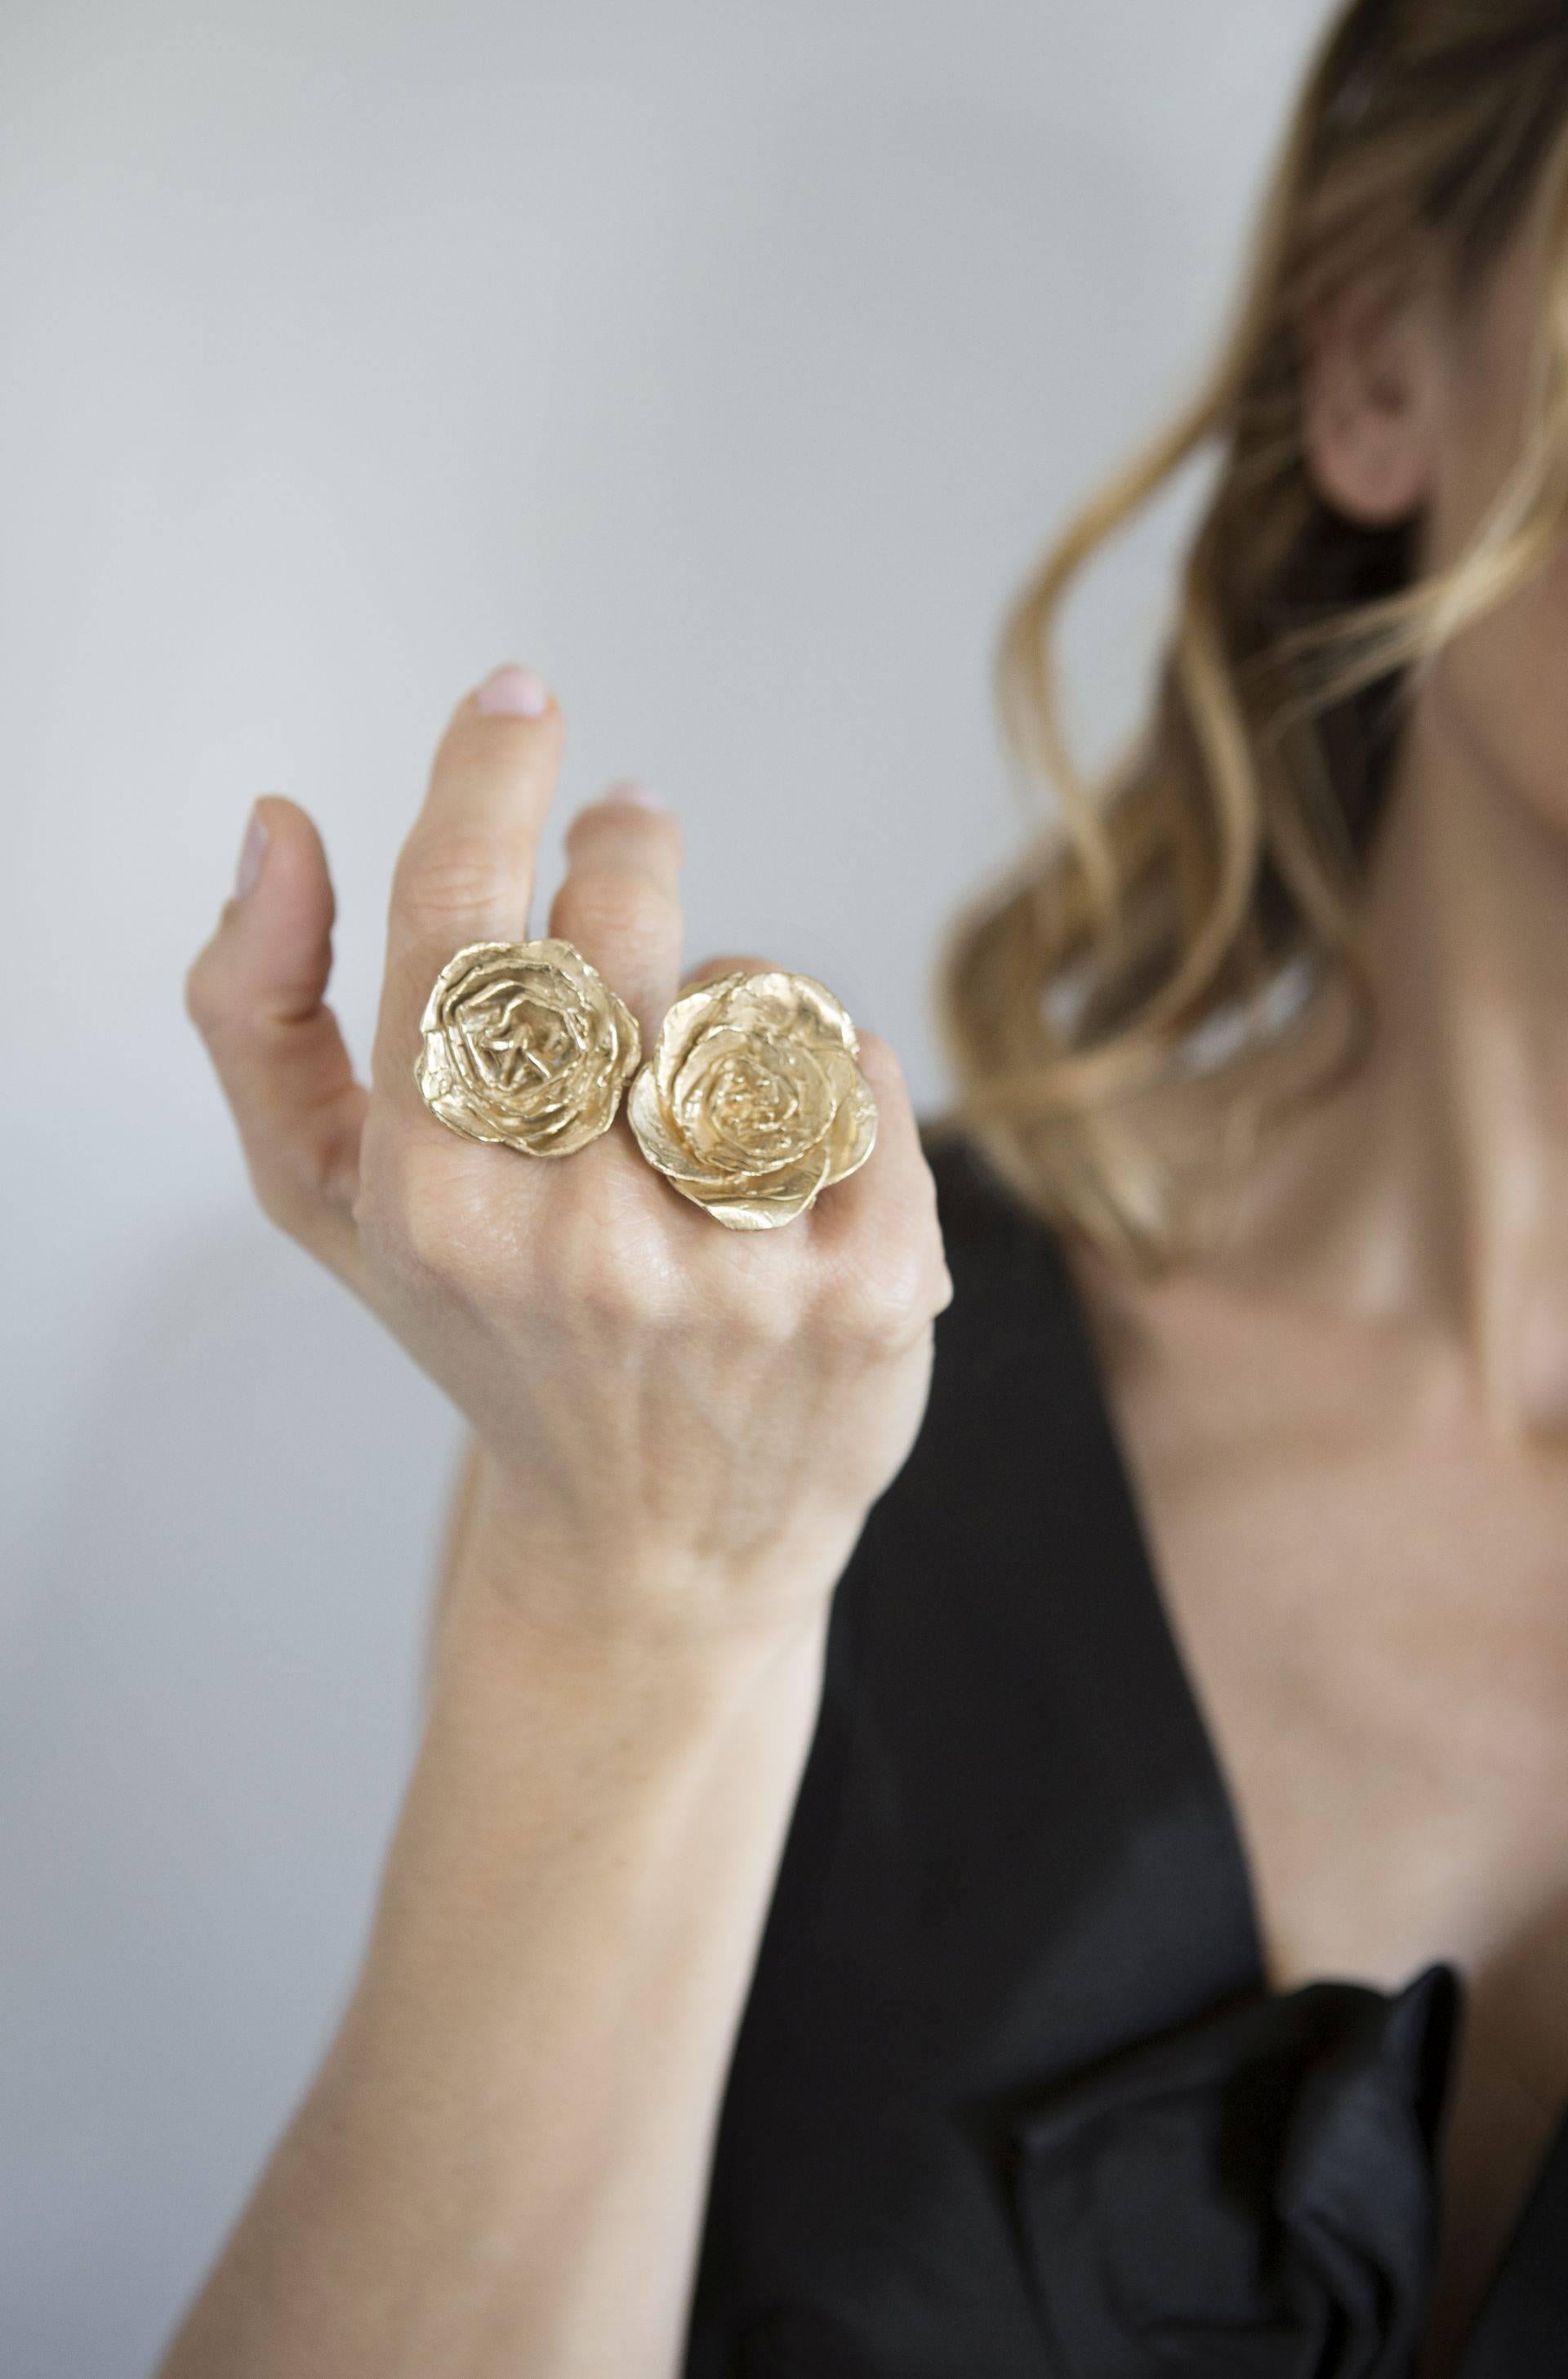 Giulia Barela's Cameliae ring is handmade and dipped in 24k gold plated bronze

Completely inspired by nature, in particularly light this jewel is brought to life. Giulia Barela jewels are characterized, stylistically, from strong sculptural effects